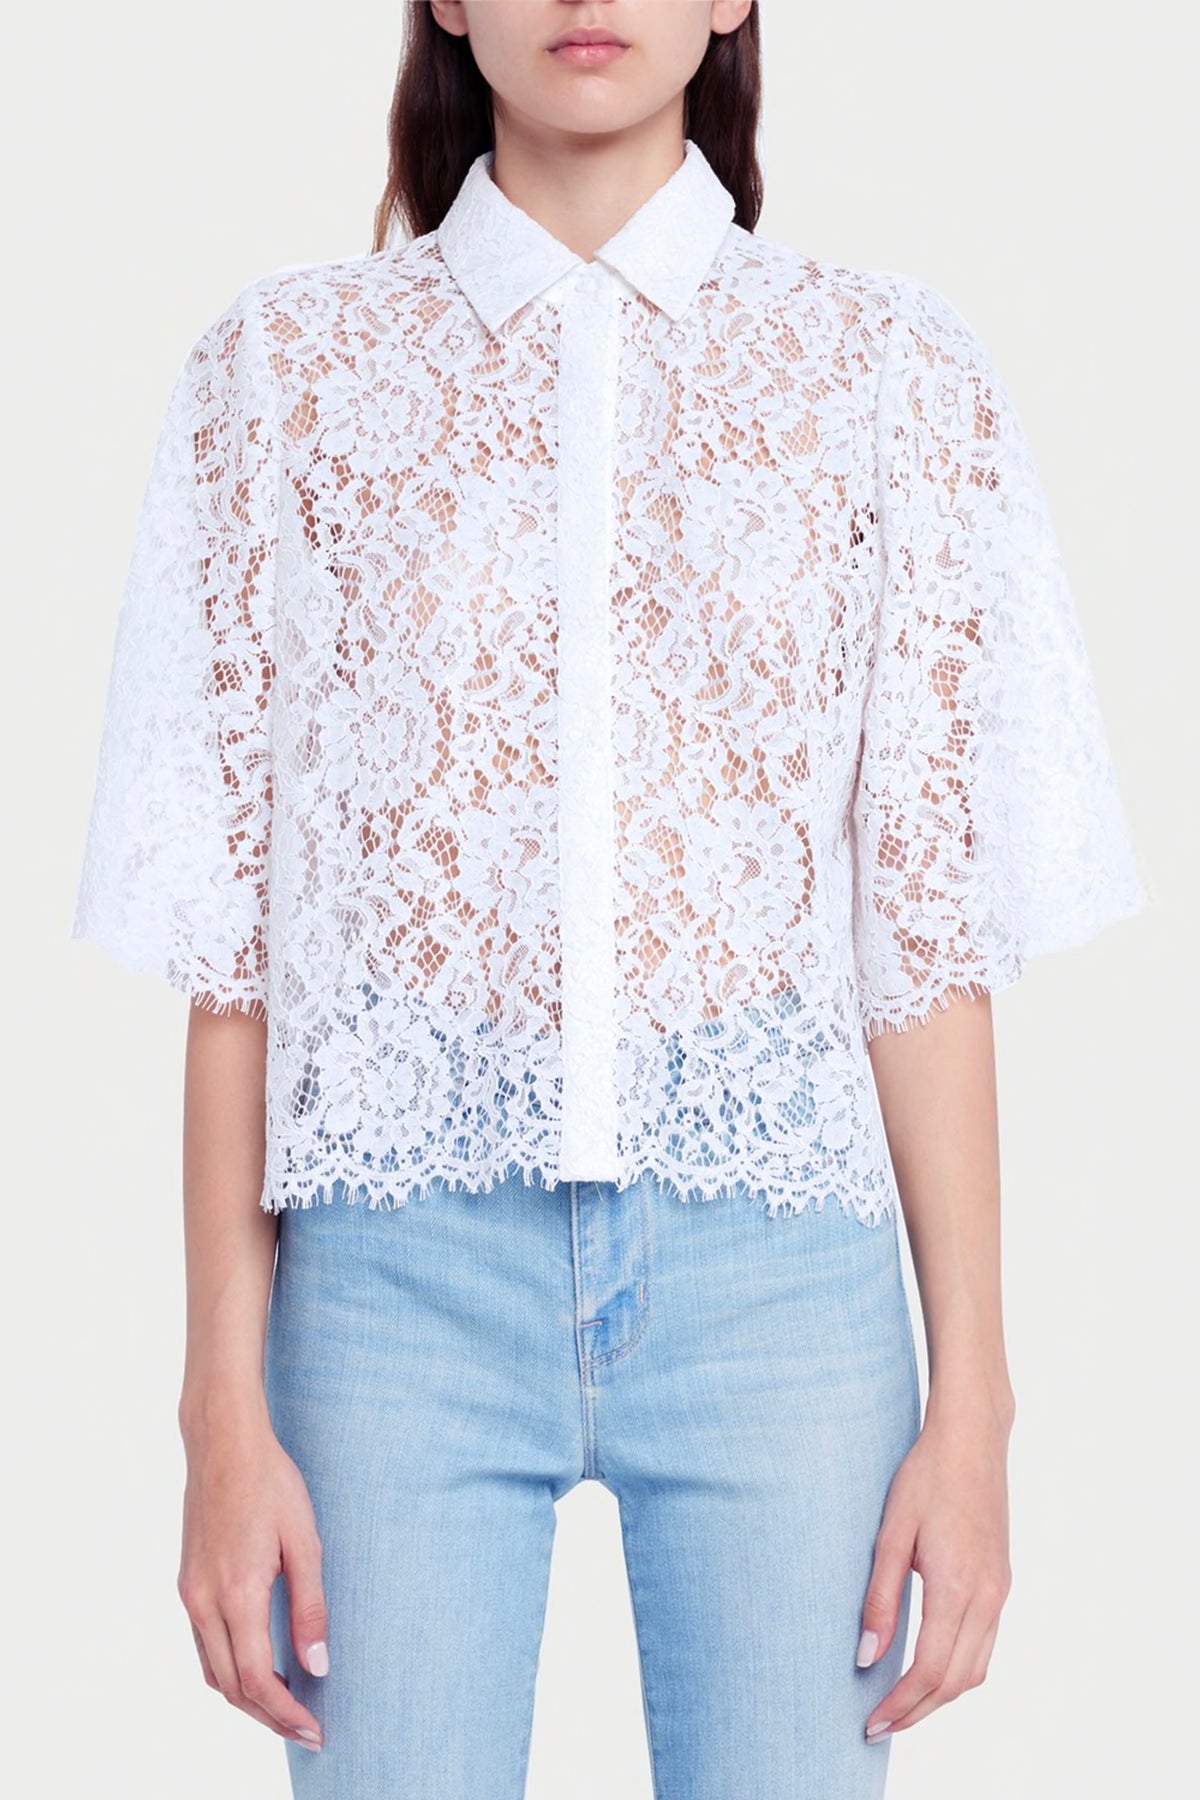 L' Agence Fern Bell Sleeve Lace Blouse